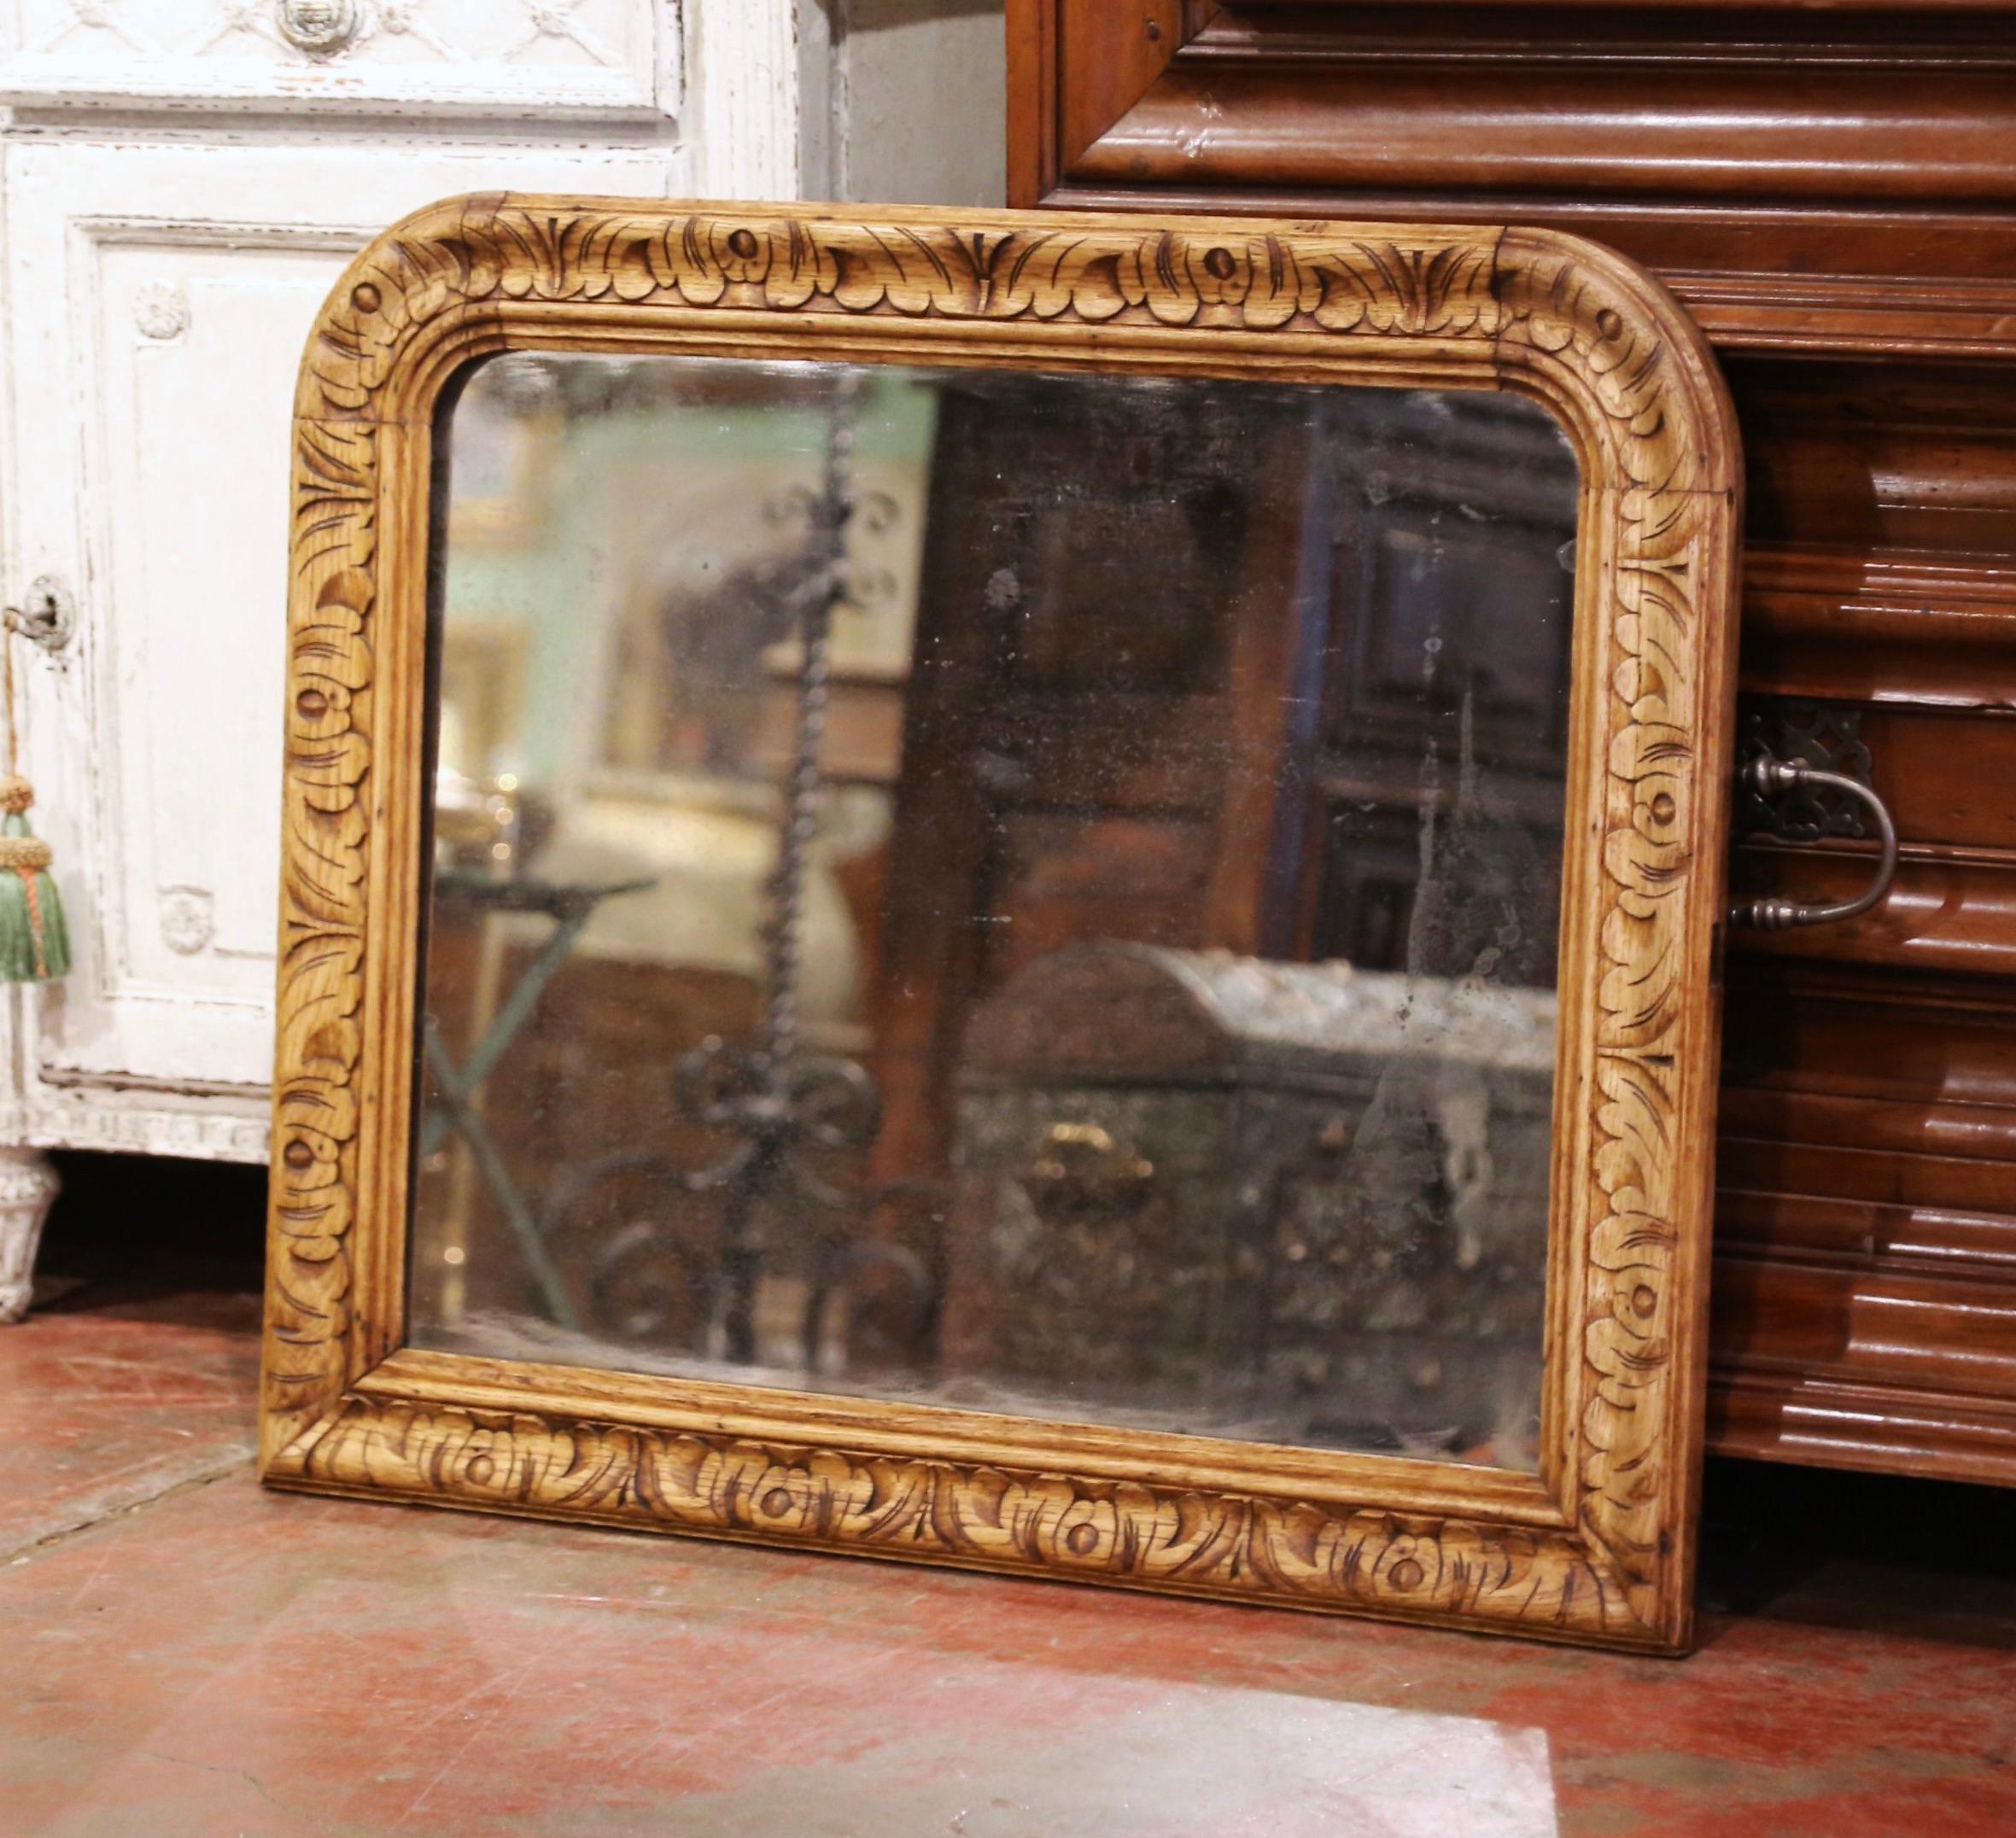 Crafted in France circa 1870, and built of oak wood, the antique mirror is rectangular in shape with rounded corners. The wall decor features a center mirror with mercury glass, and is decorated with hand carved acanthus leaf motifs throughout. The